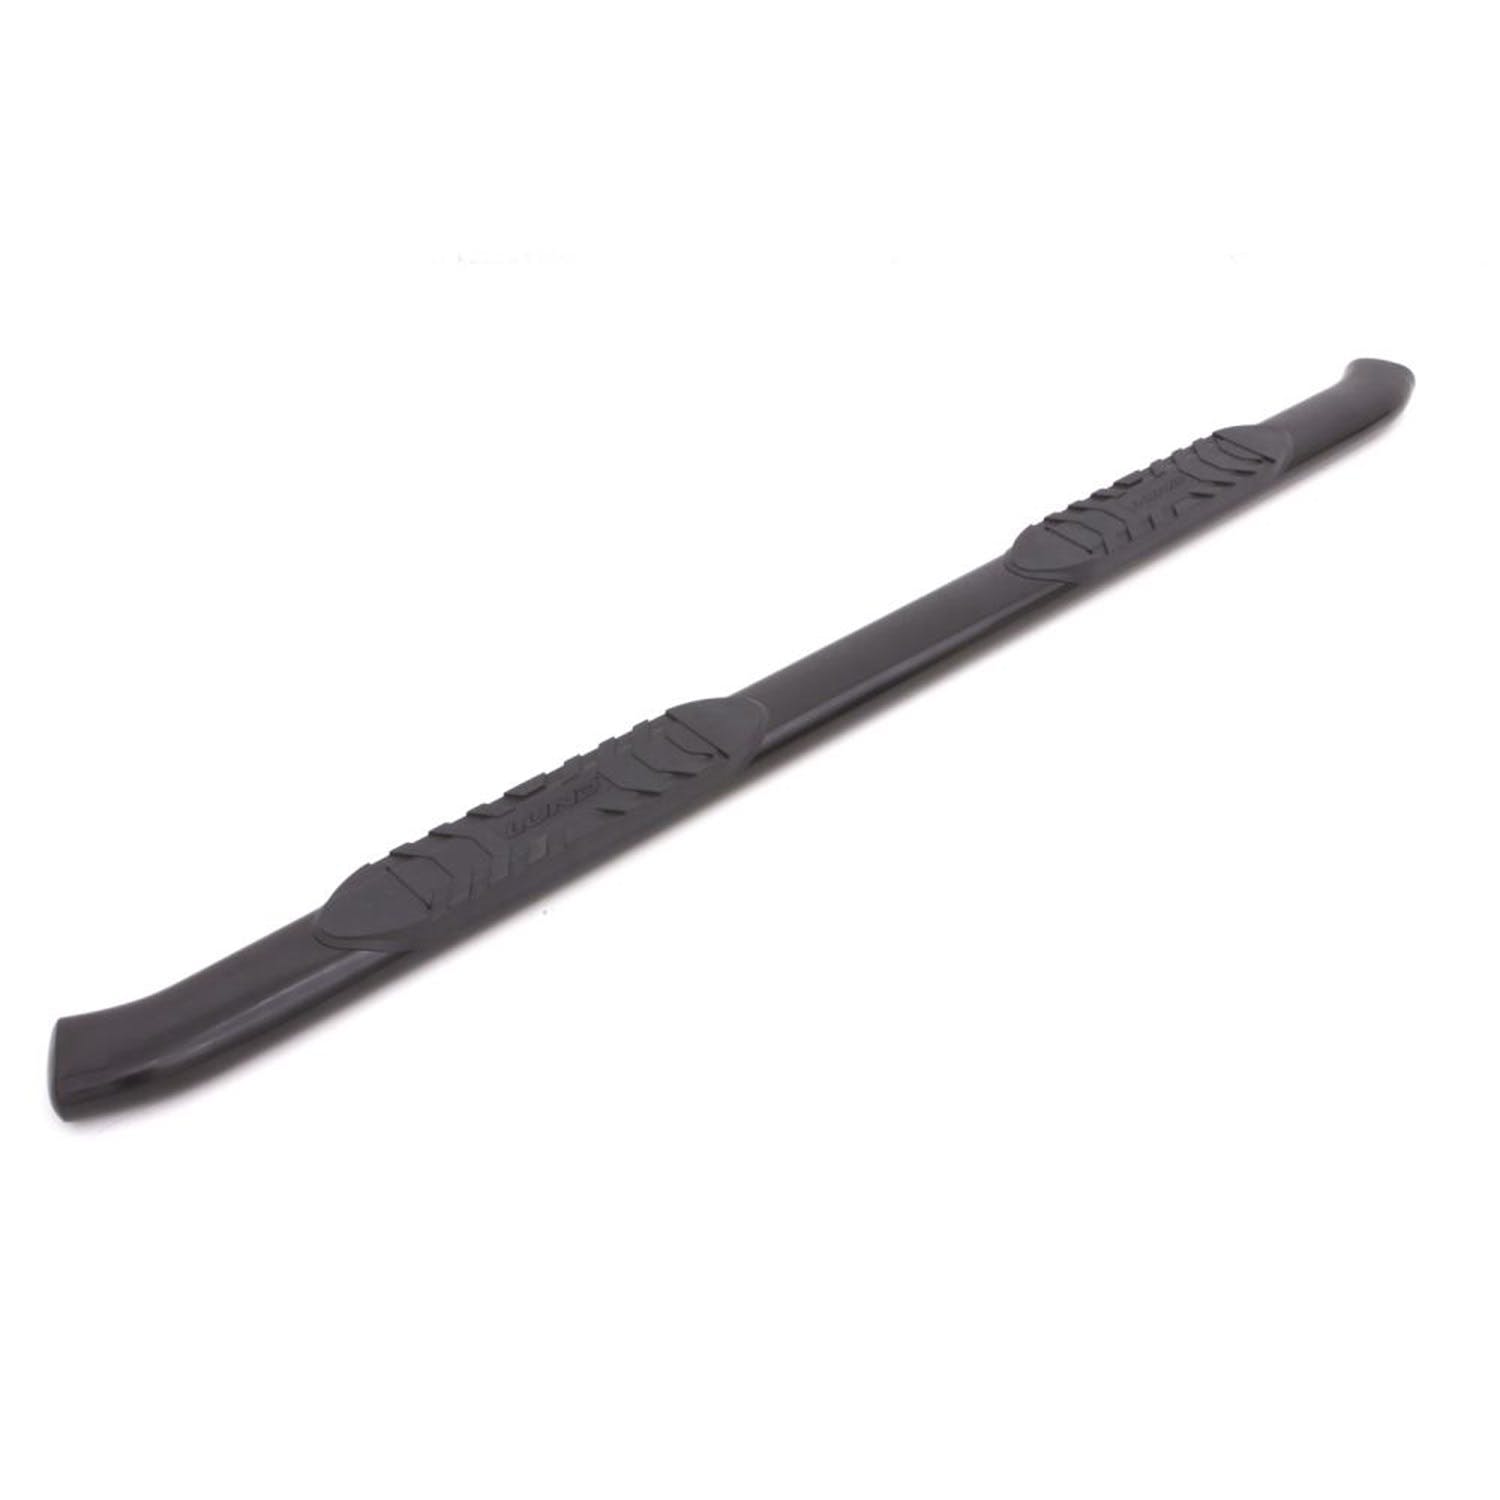 LUND 23889008 5 Inch Oval Curved Nerf Bar - Black 5 In OVAL CURVED STEEL